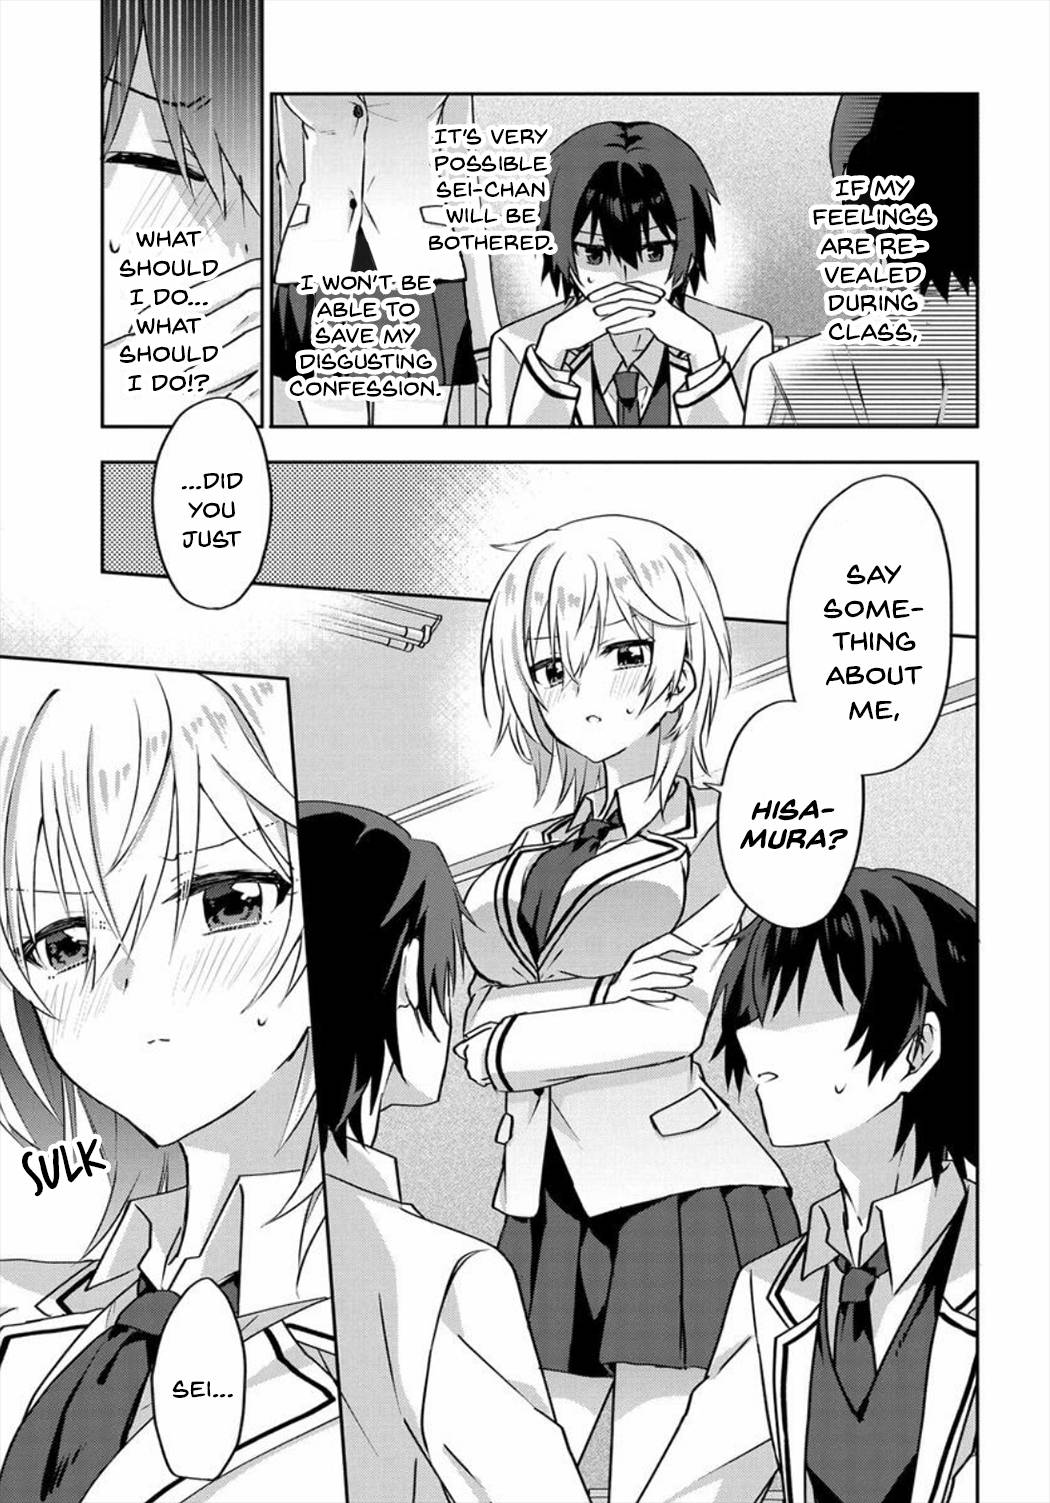 Since I’Ve Entered The World Of Romantic Comedy Manga, I’Ll Do My Best To Make The Losing Heroine Happy - chapter 3.2 - #4